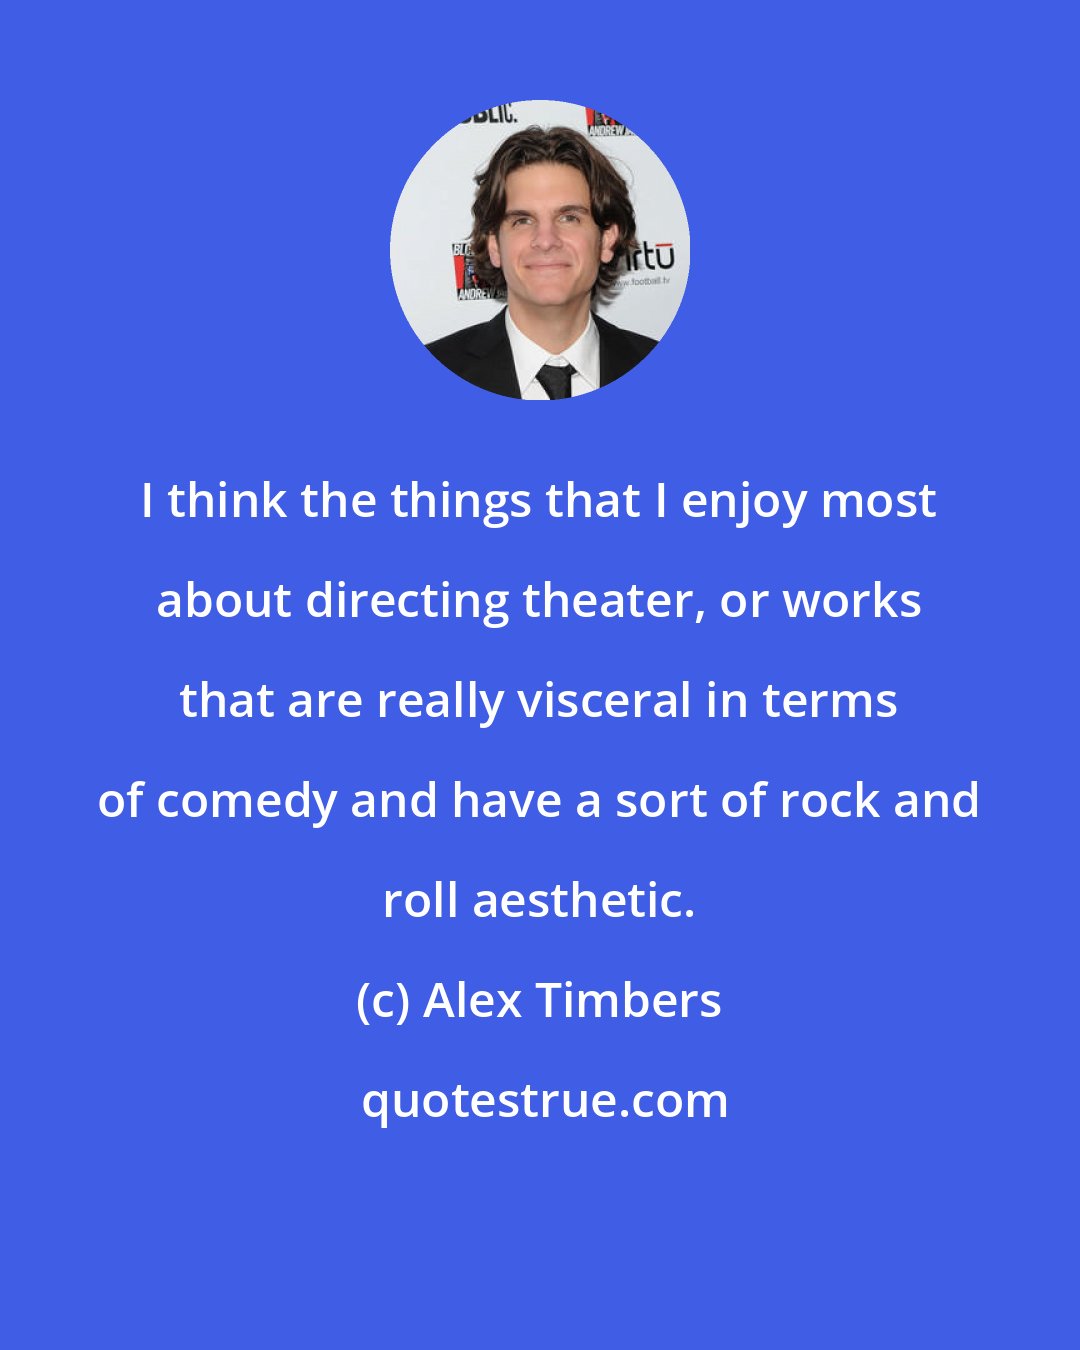 Alex Timbers: I think the things that I enjoy most about directing theater, or works that are really visceral in terms of comedy and have a sort of rock and roll aesthetic.